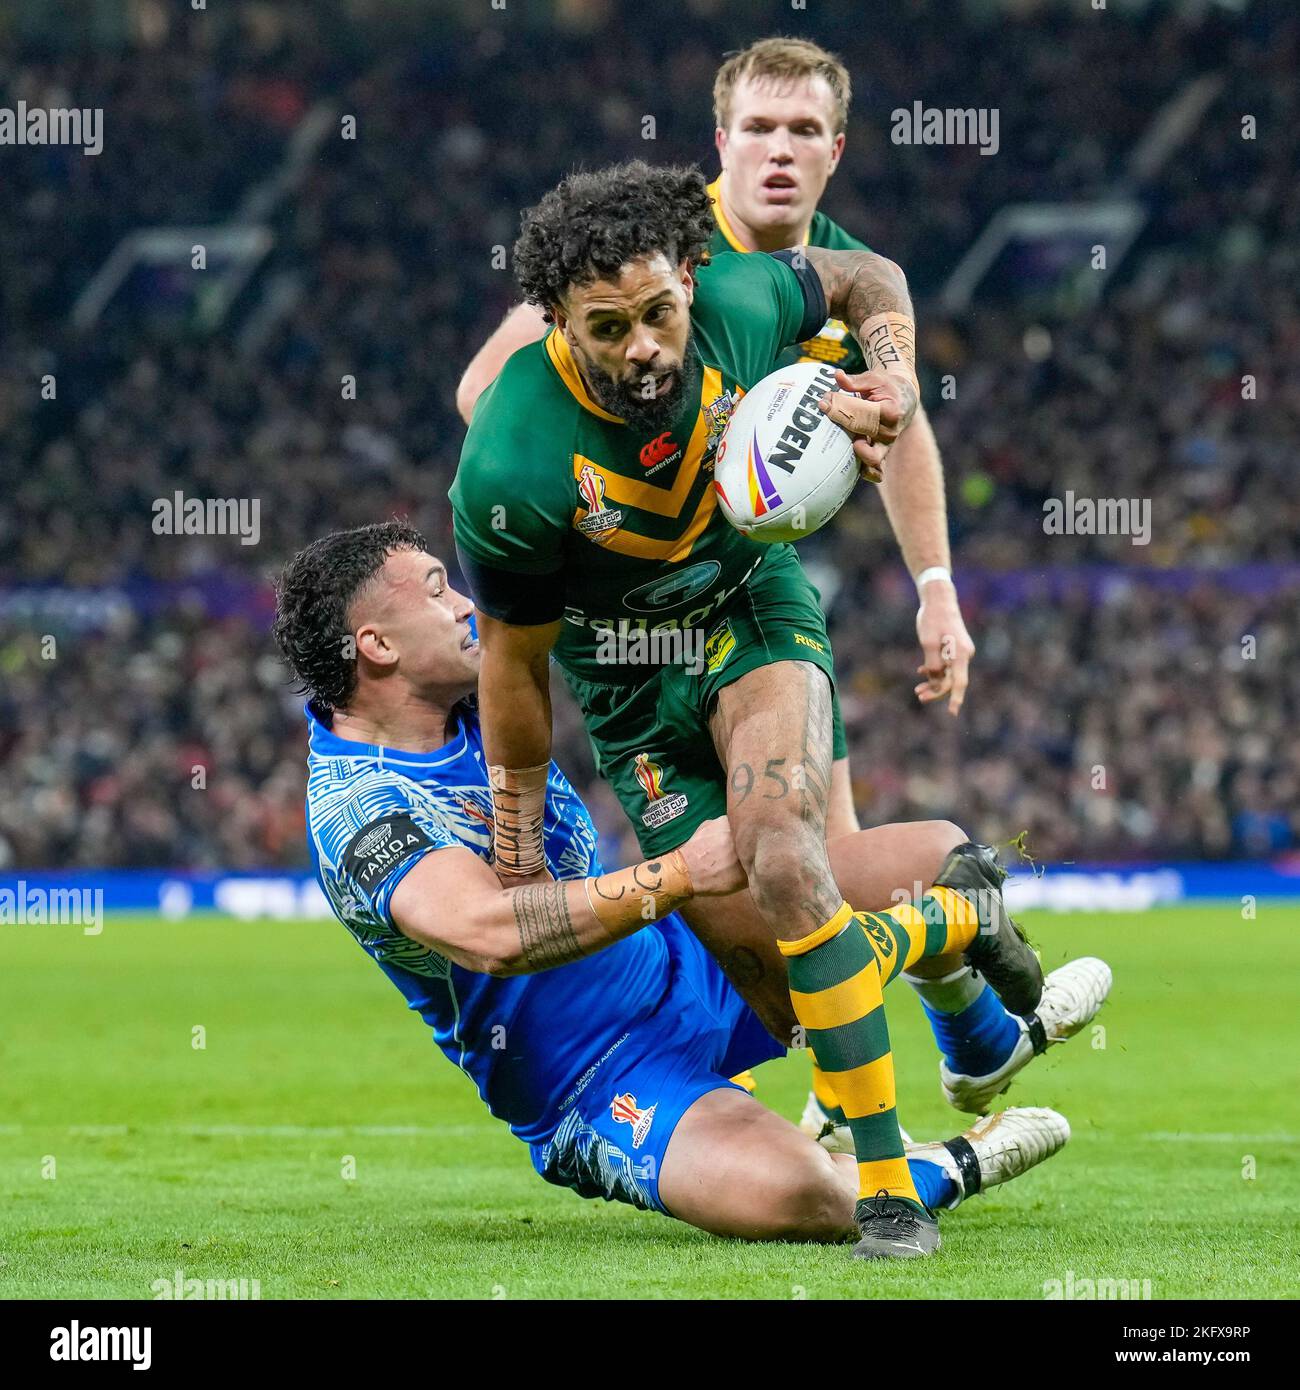 Manchester, UK. 18th Nov, 2022. Josh Addo-Carr (Canterbury Bankstown Bulldogs) of Australia (9) during the 2021 Rugby League World Cup Final 2021 match between Australia and Samoa at Old Trafford, Manchester, England on 19 November 2022. Photo by David Horn. Credit: PRiME Media Images/Alamy Live News Stock Photo